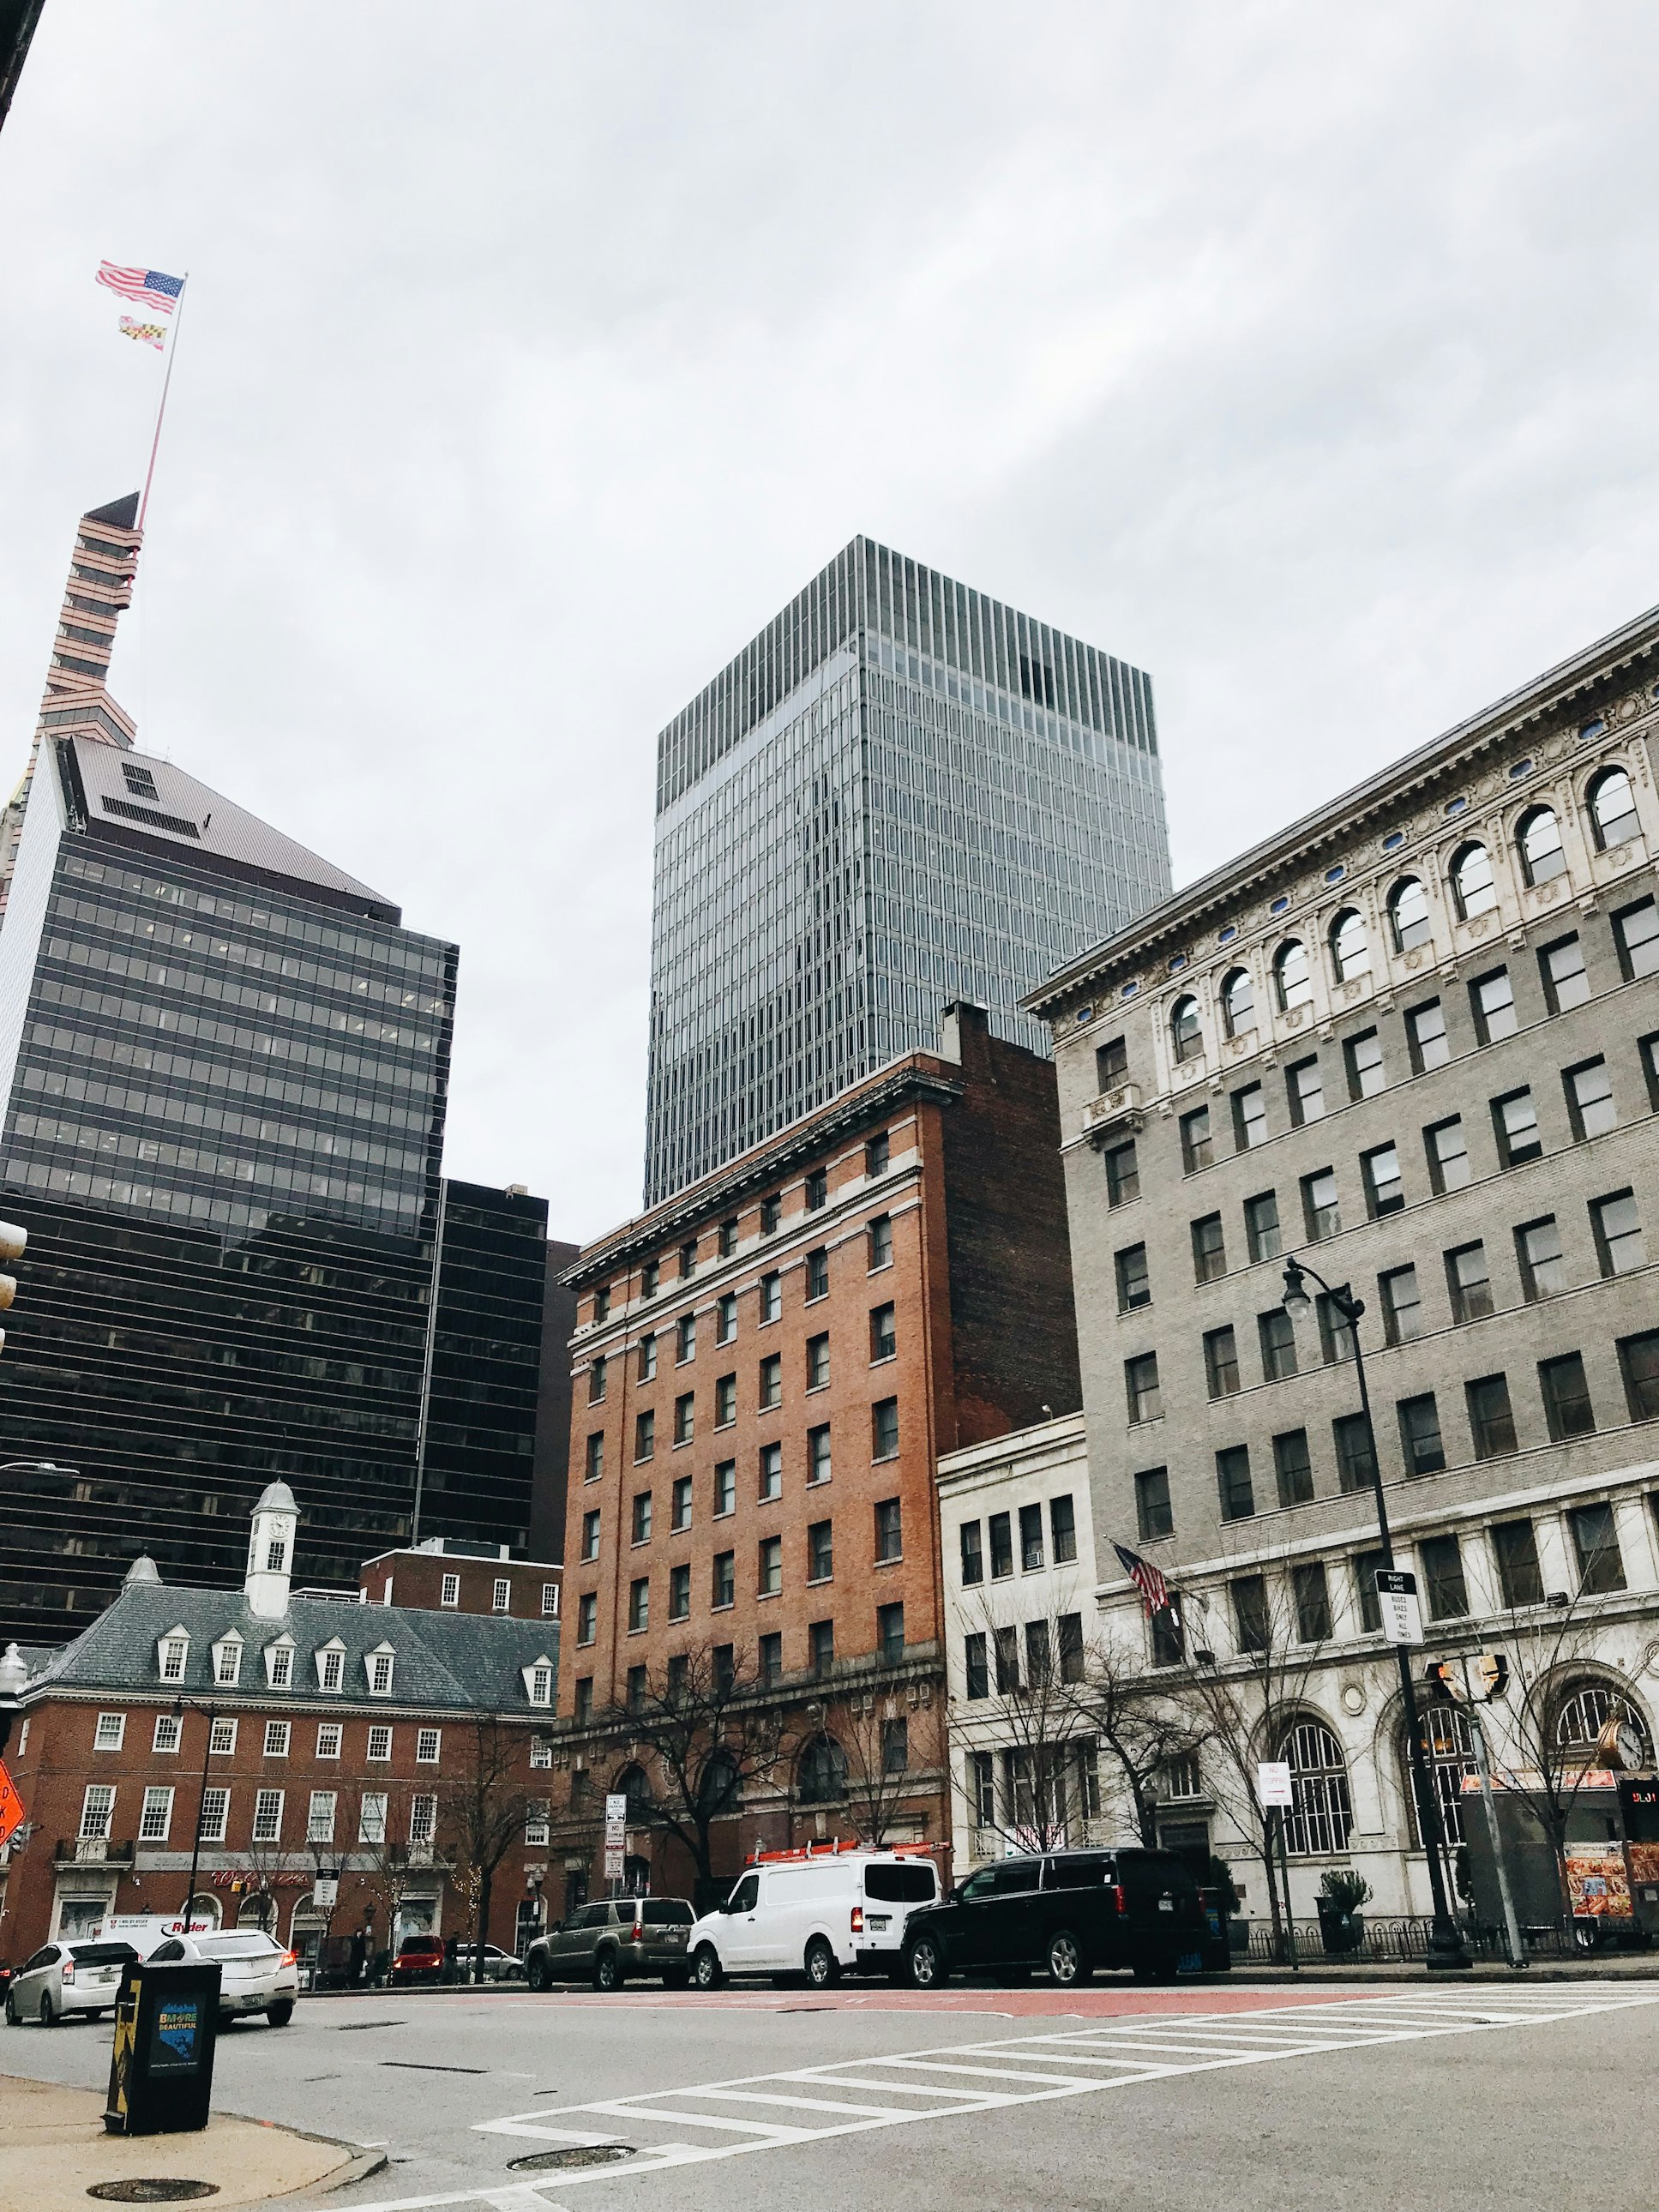 Old and new buildings in Baltimore, Maryland, representing diverse real estate investment options.